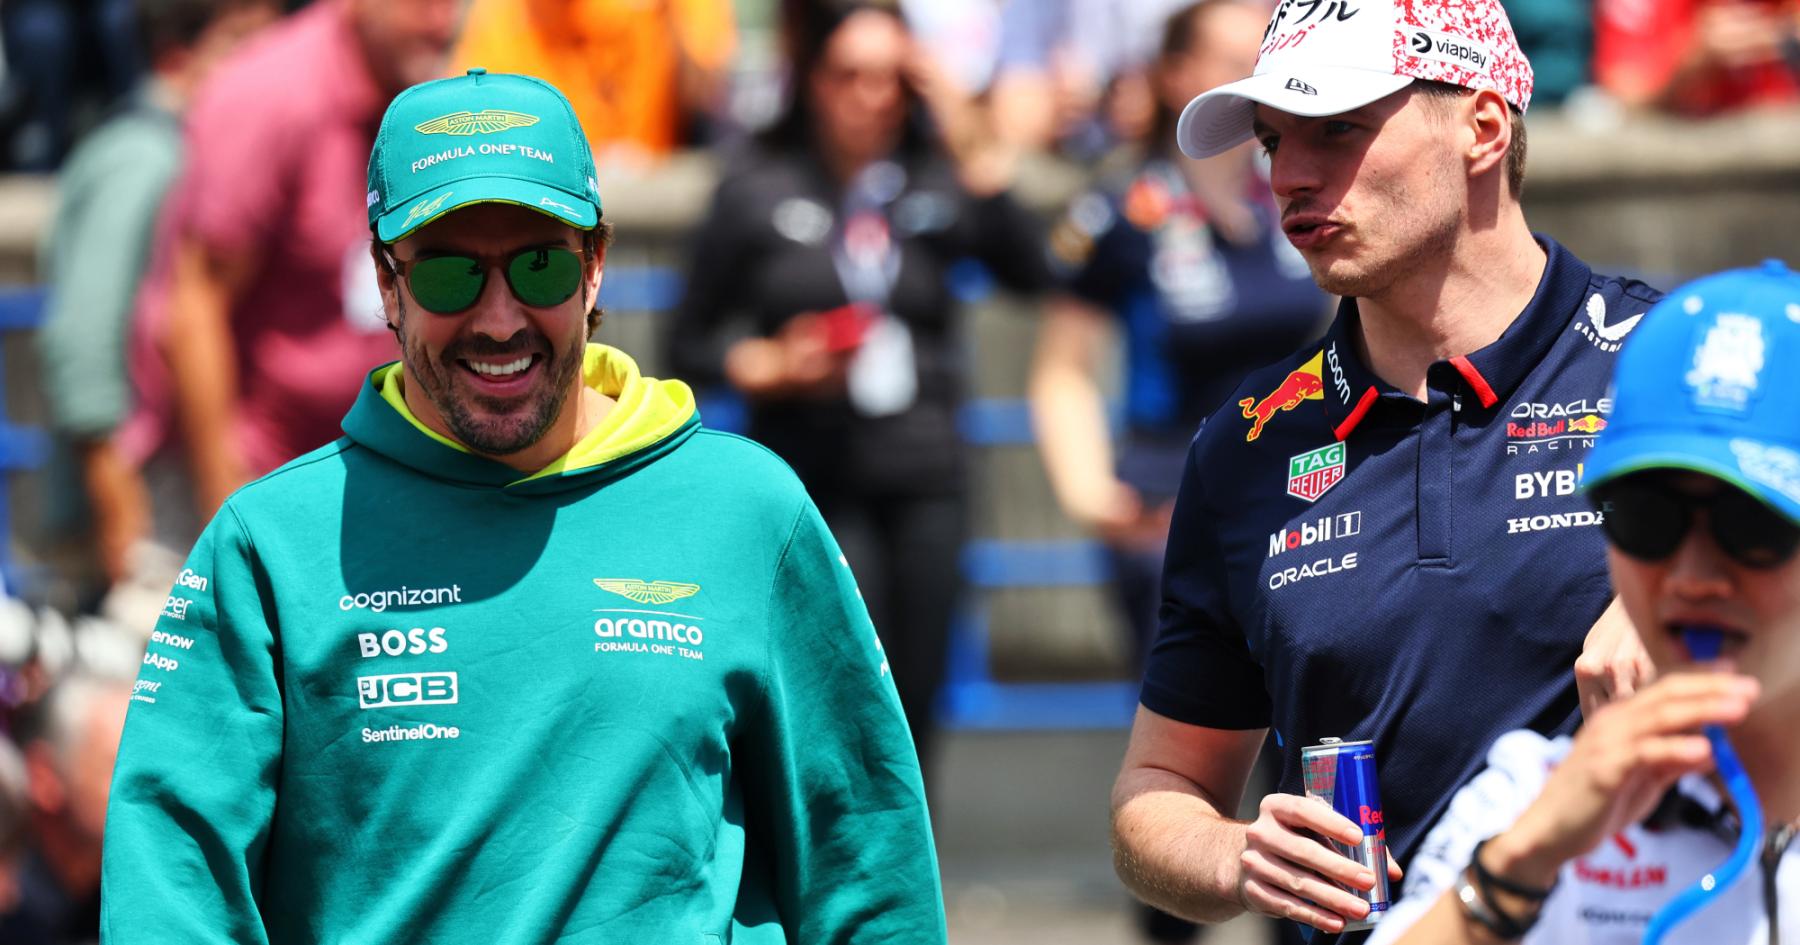 Poll: Did Alonso make the right choice in re-signing with Aston Martin?